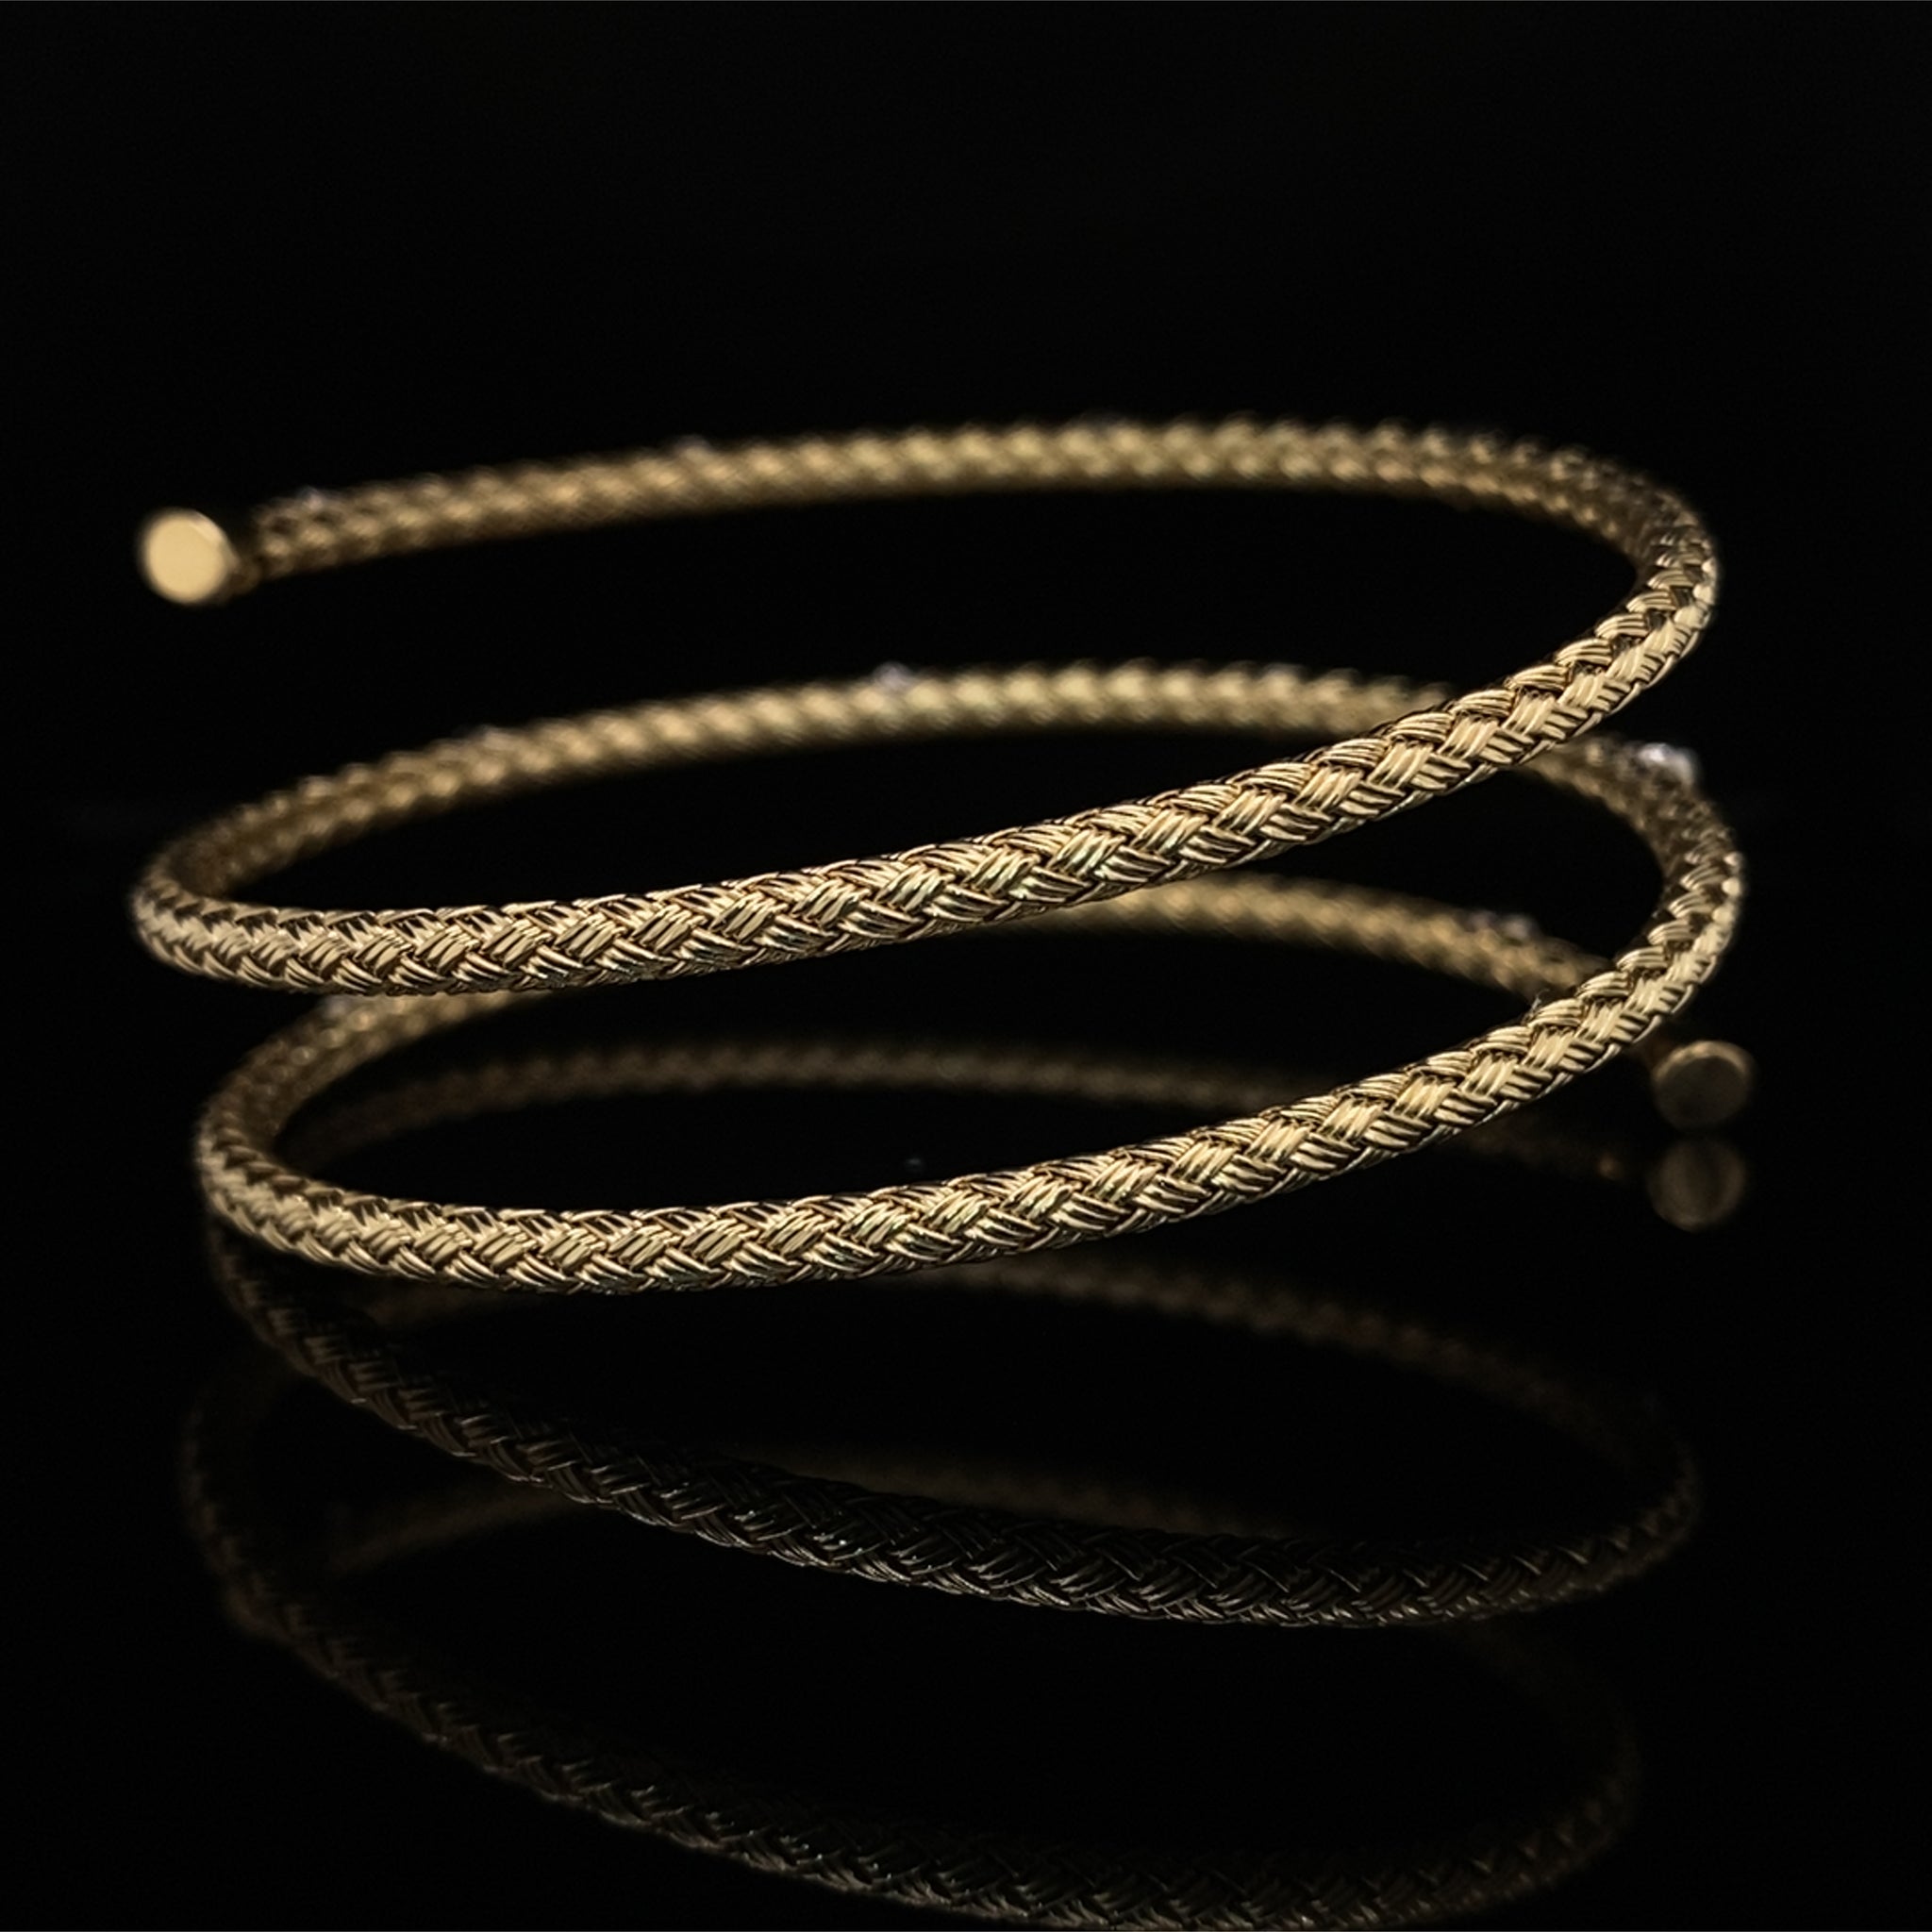 22 kt 115.90 GM Handmade Gold Bangles | Indian Gold Jewelry